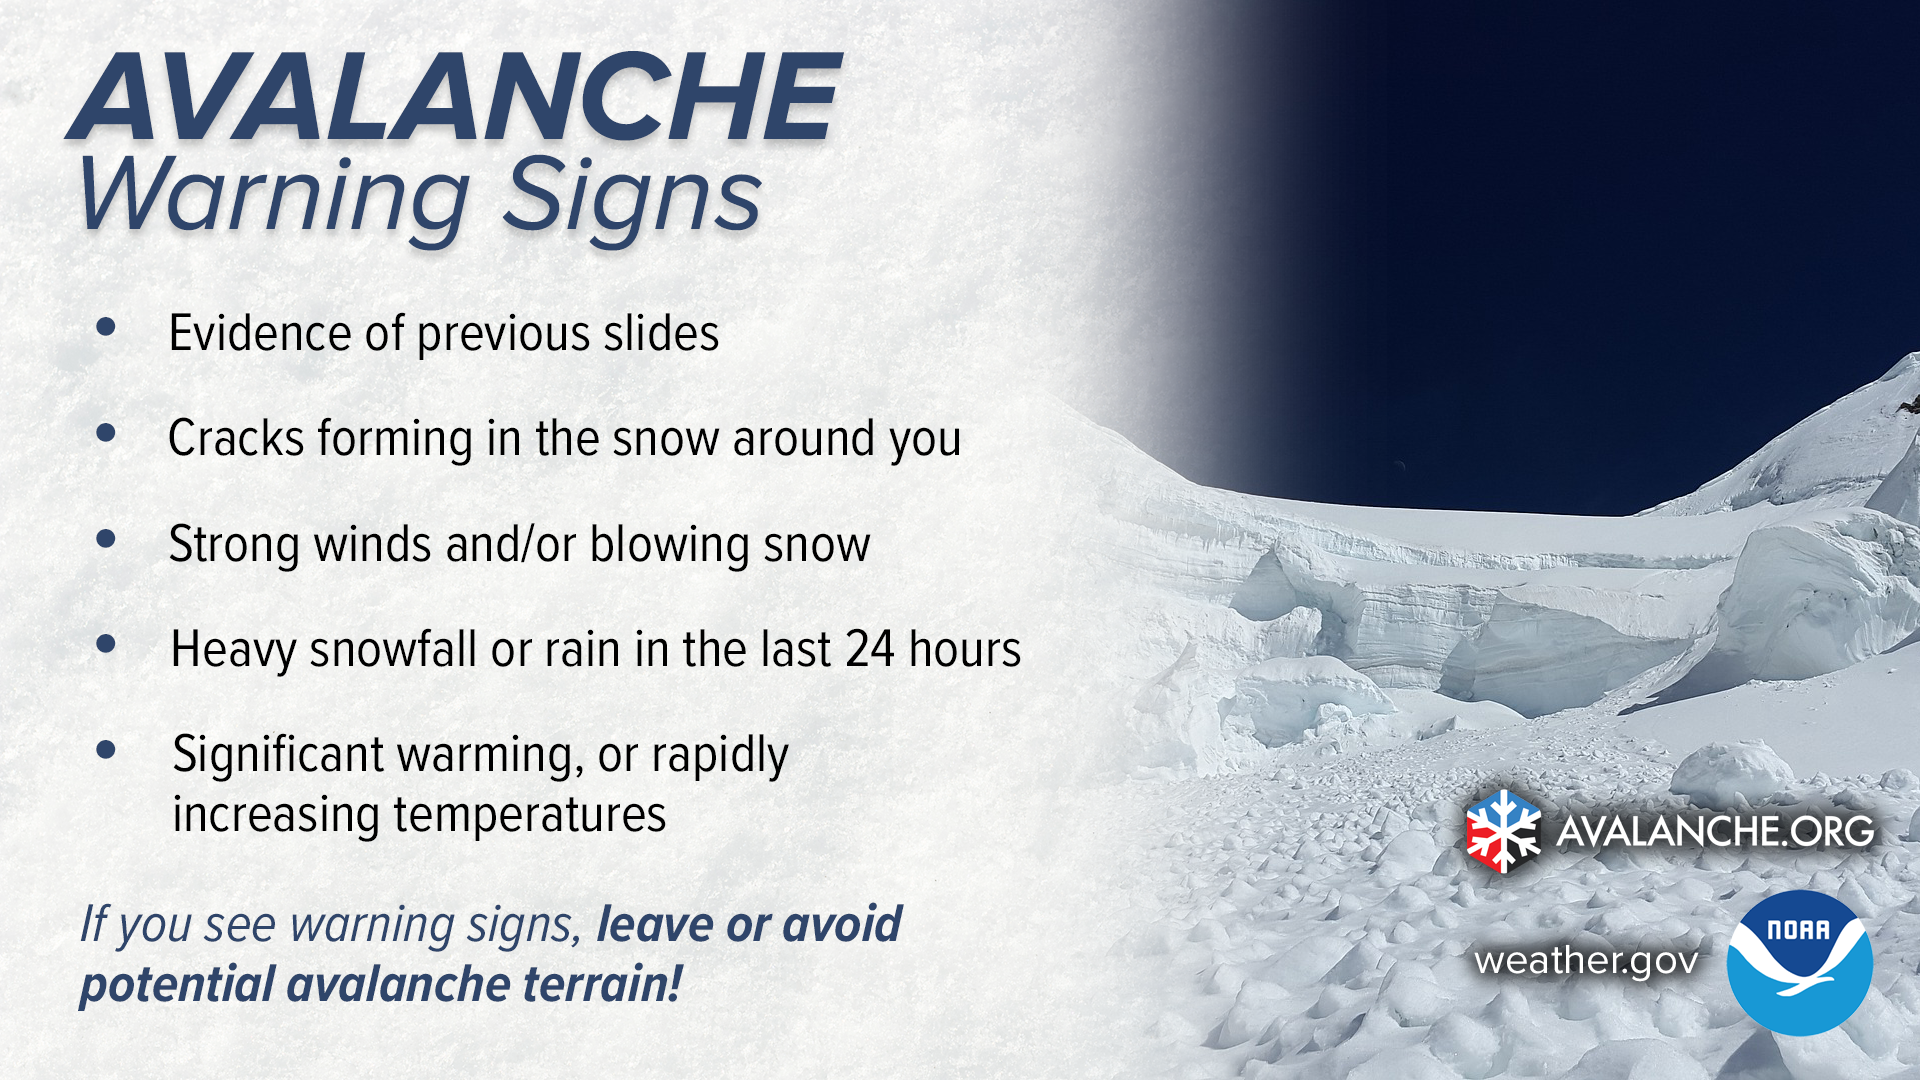 Avalanche Warning Signs: 1) Evidence of previous slides. 2) Cracks forming in the snow around you. 3) Strong winds and/or blowing snow. 4) Heavy snowfall or rain in the last 24 hours. 5) Significant warming, or rapidly increasing temperatures. If you see warning signs, leave or avoid potential avalanche terrain!